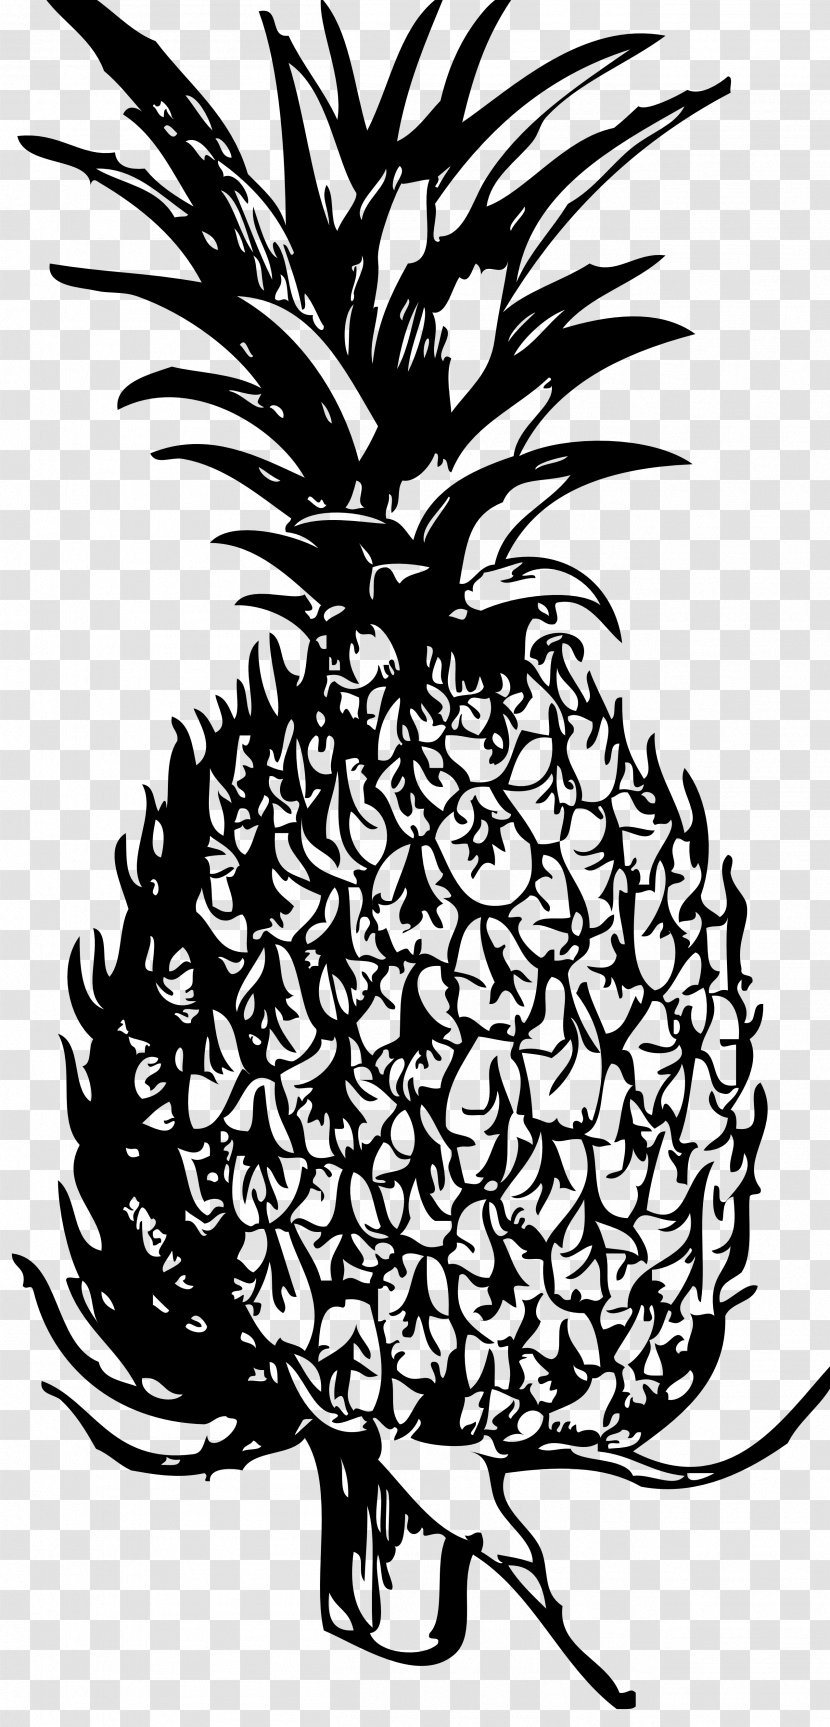 Pineapple Black And White Clip Art Transparent PNG